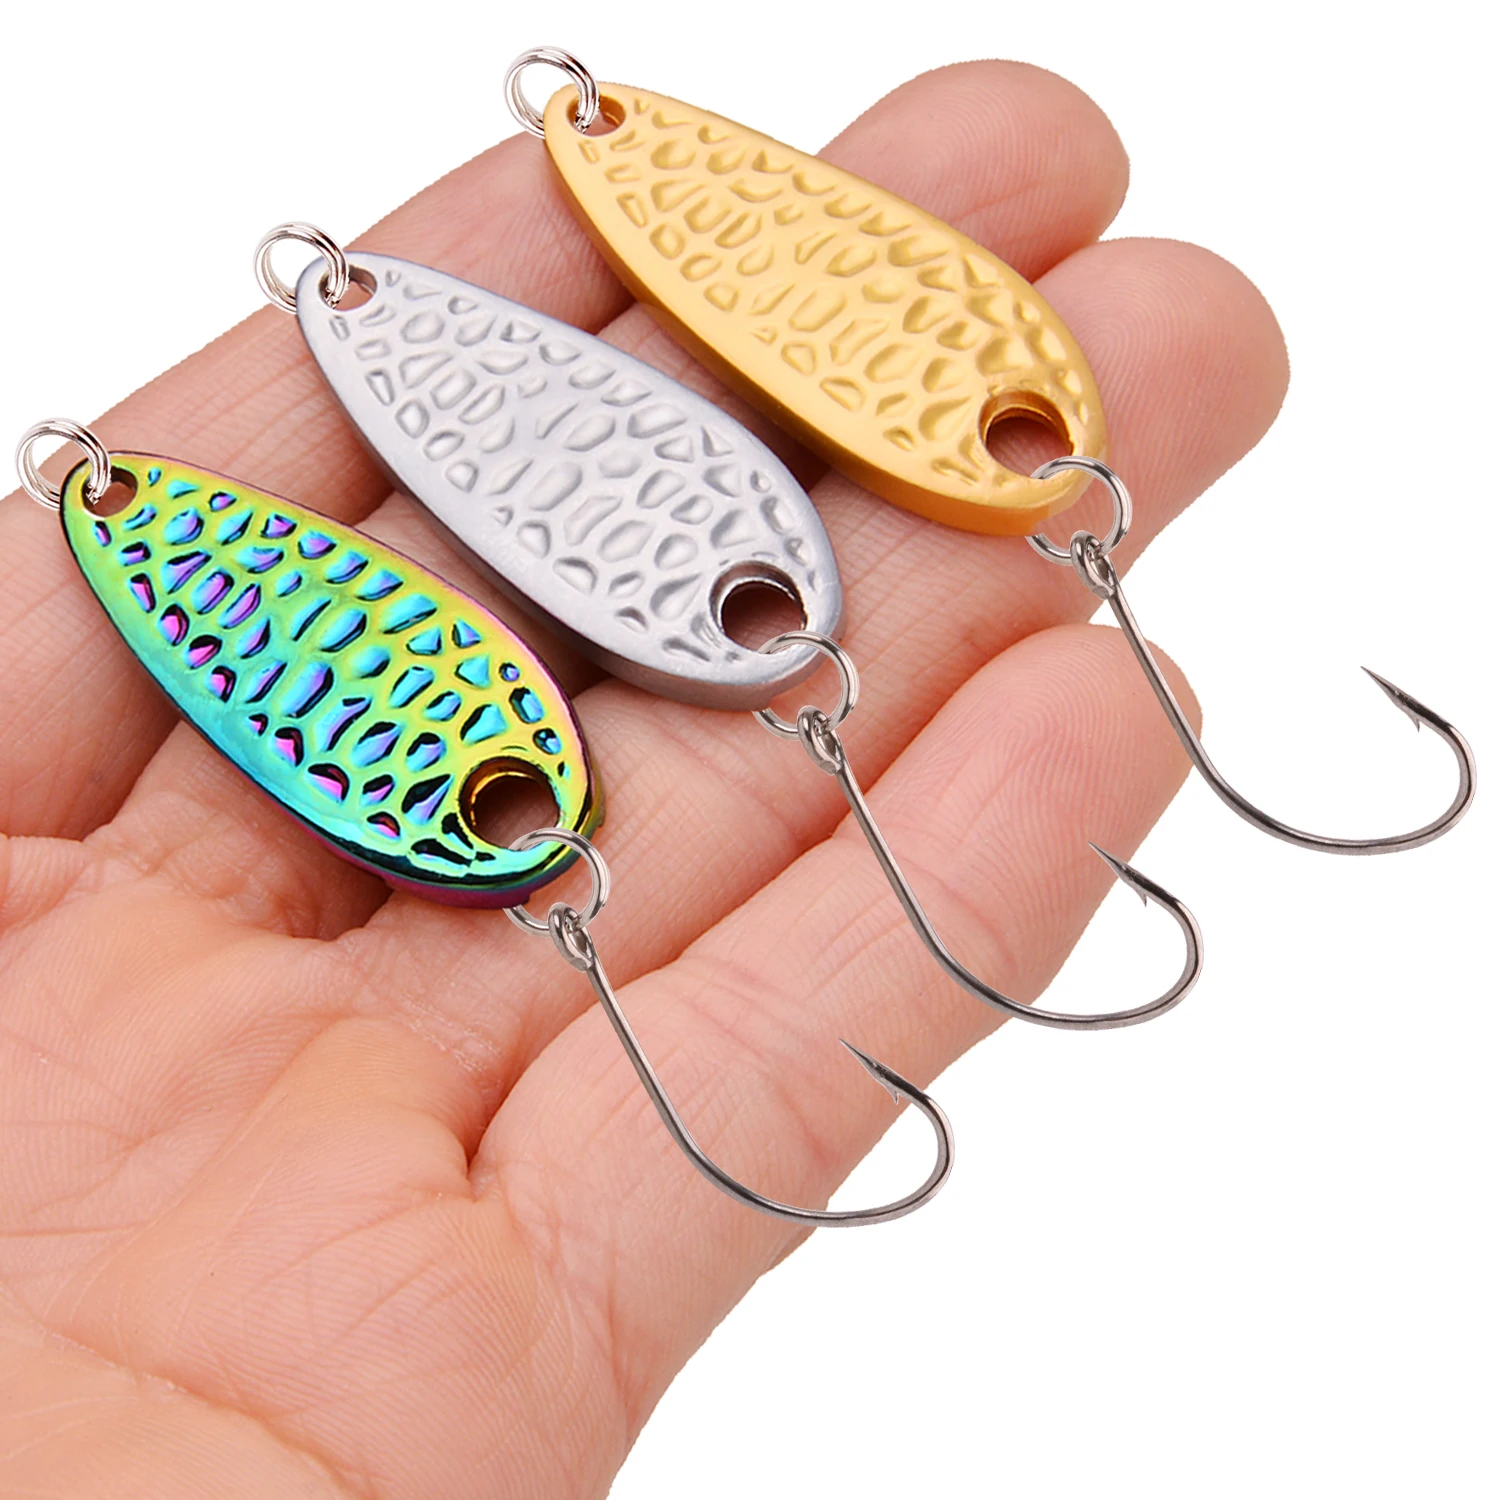 SPOON 2.5g 3.5g 5g 7g Unpainted Spoon Bait Golden Copper DIY Blank Metal  Fishing Lures For Trout Perch Salmon